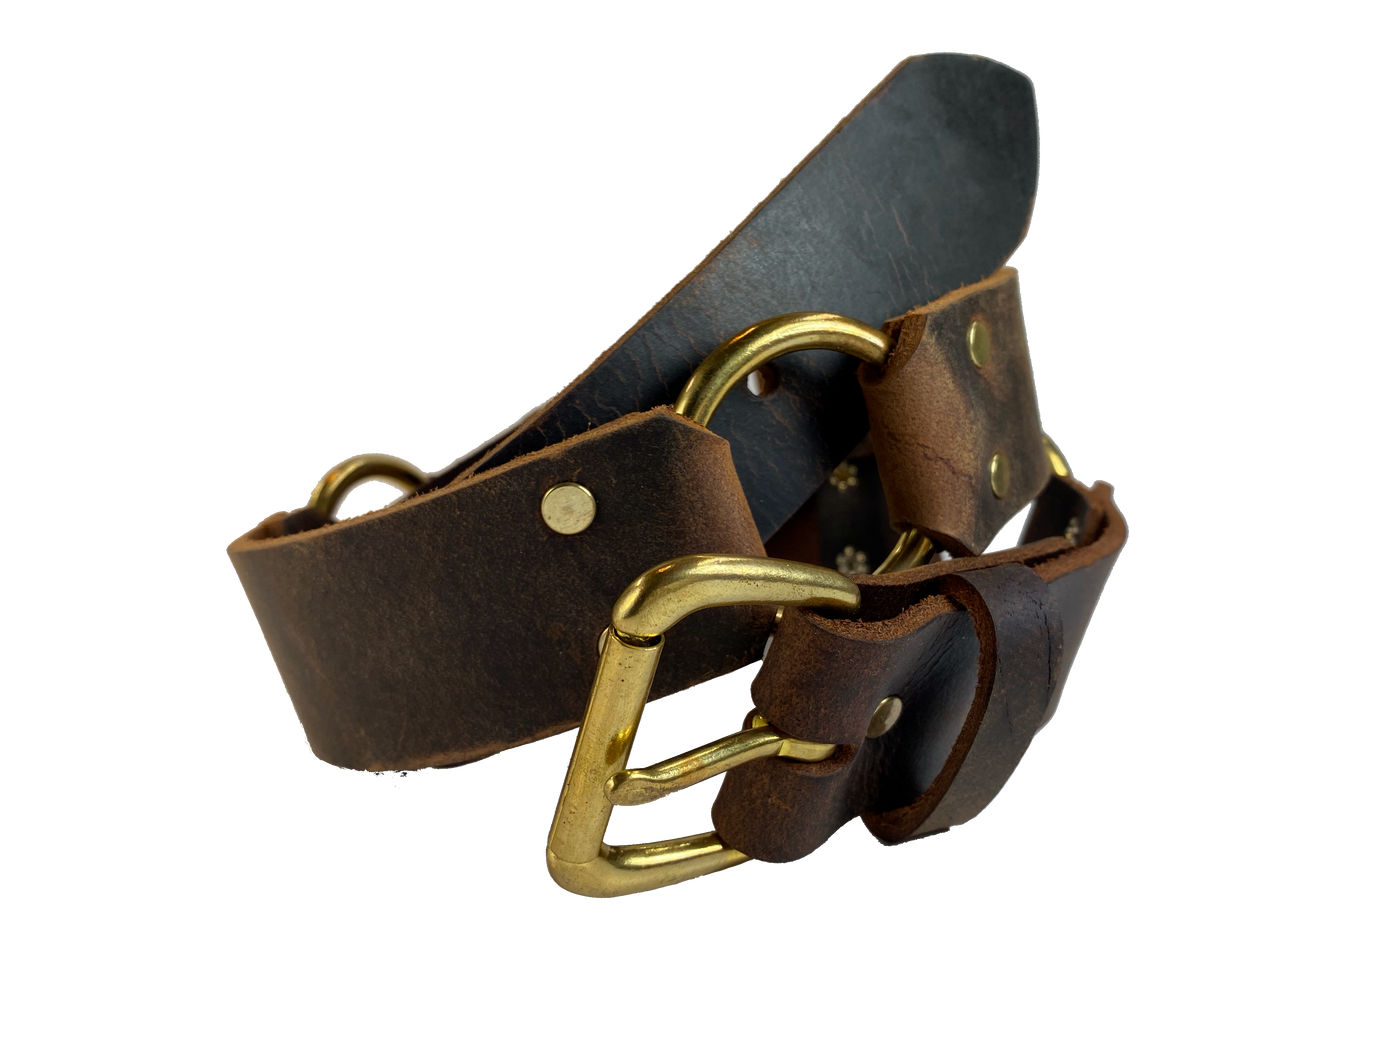 Created with the perfect balance of Solid Brass Rings, Buckle and leather sections that are riveted together for long lasting belt. We craft it right here in our Tennessee shop. This rings not just for a unique look but may be used to connect a chain wallet or keys.